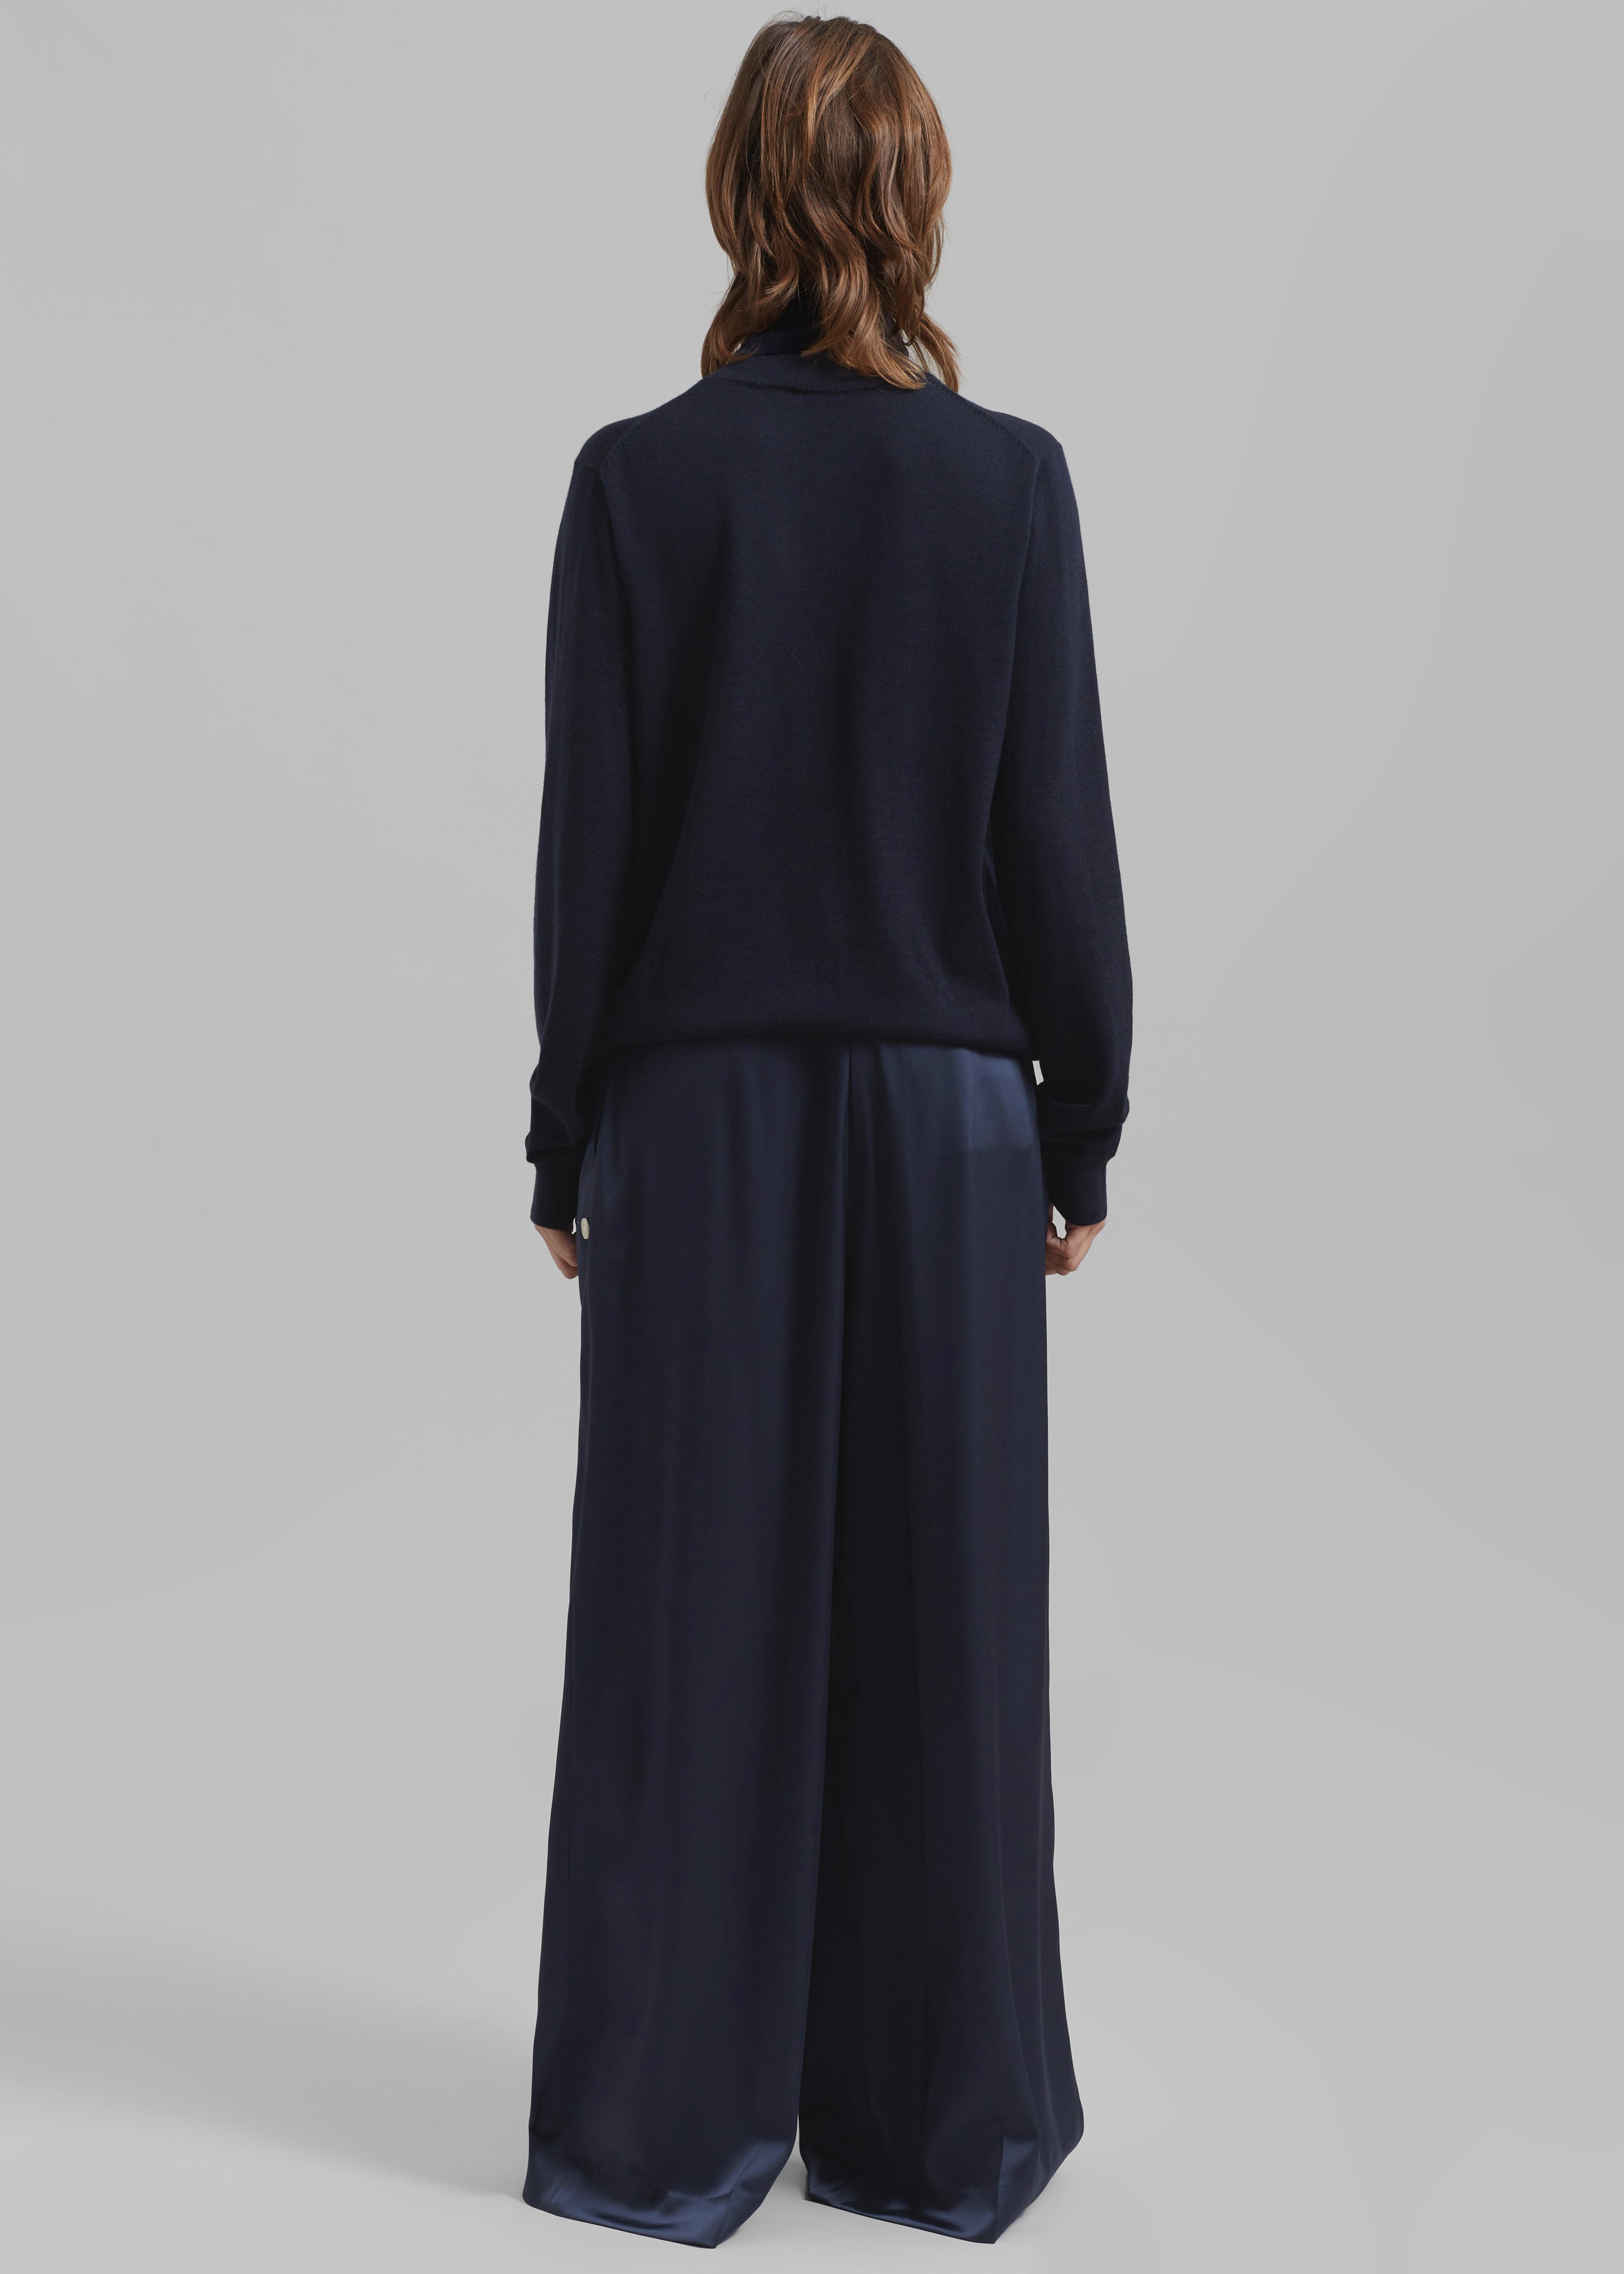 JW Anderson Crossover Strap Wide Leg Trousers - Navy - 8